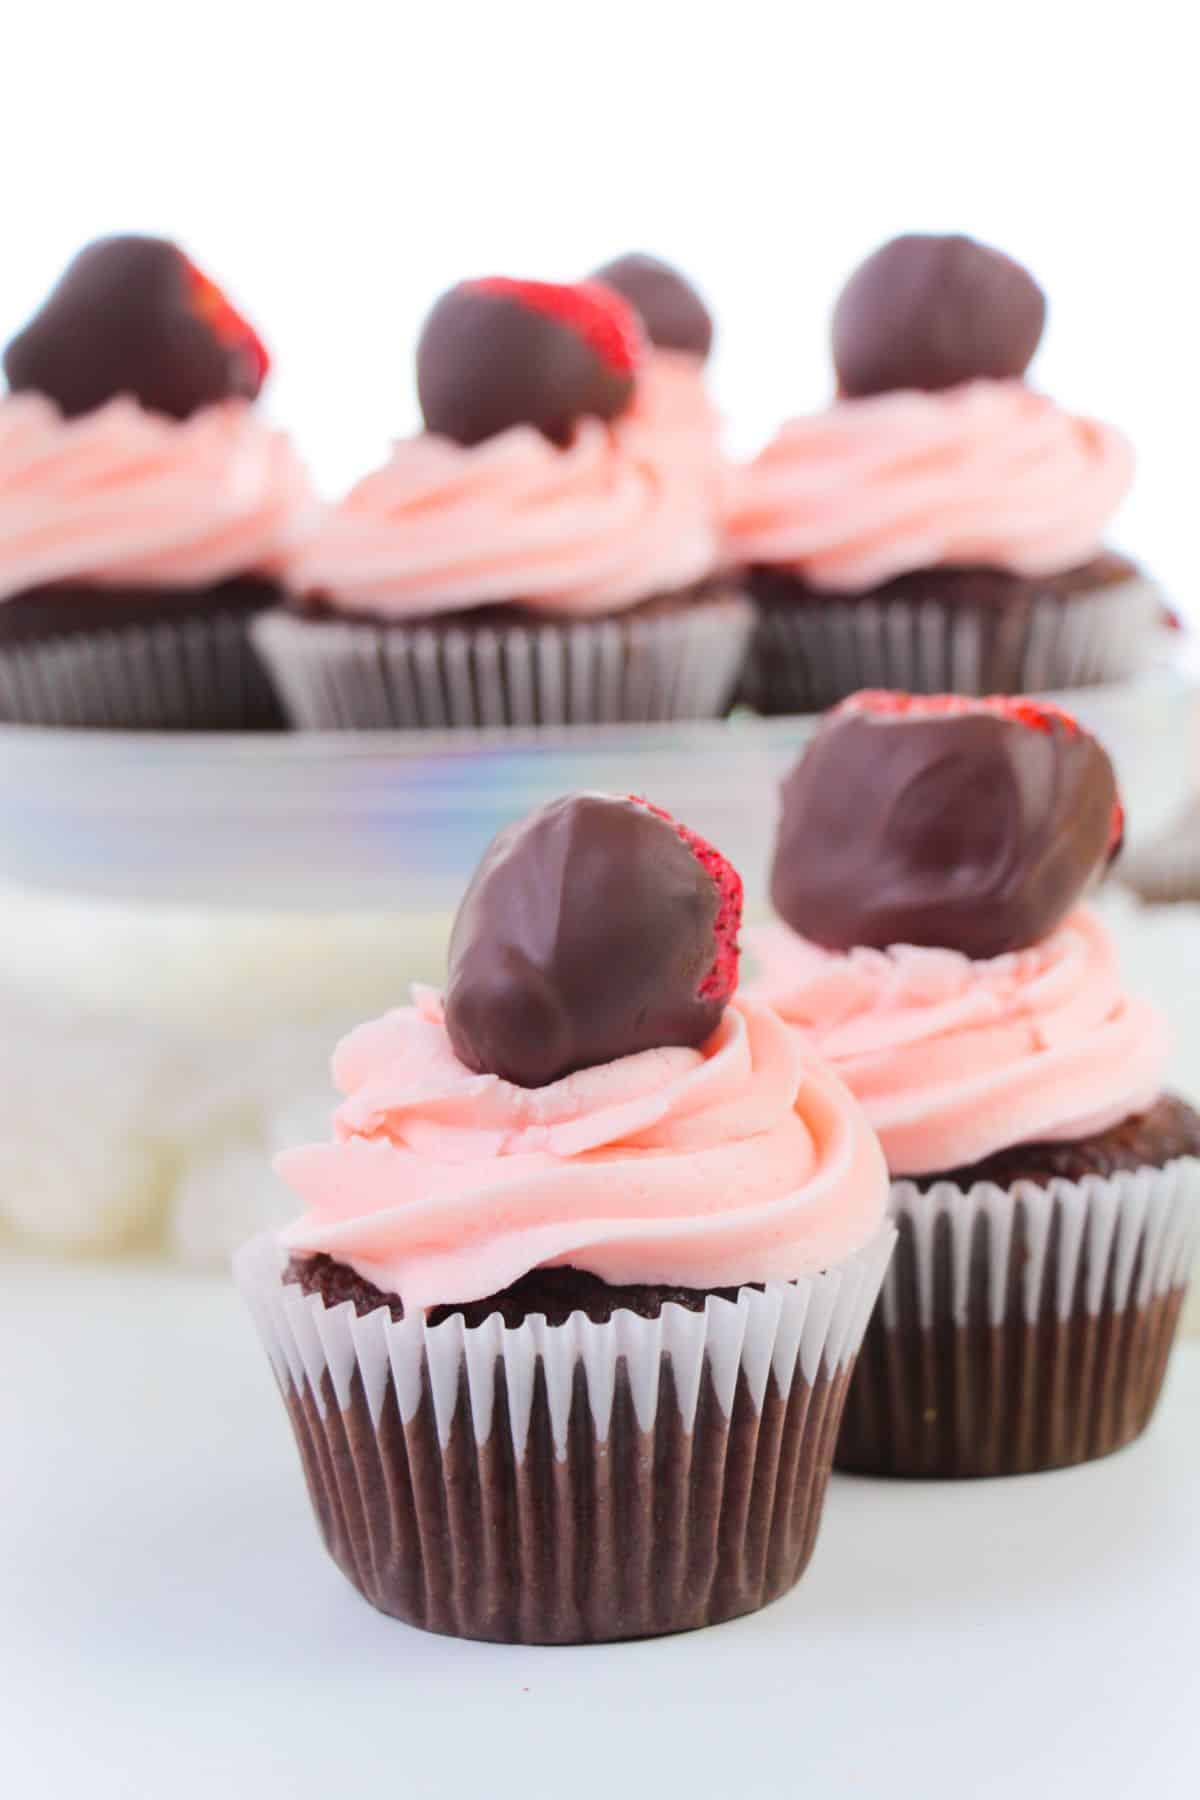 2 Chocolate Strawberry Cupcakes with more cupcakes blurred in the background.